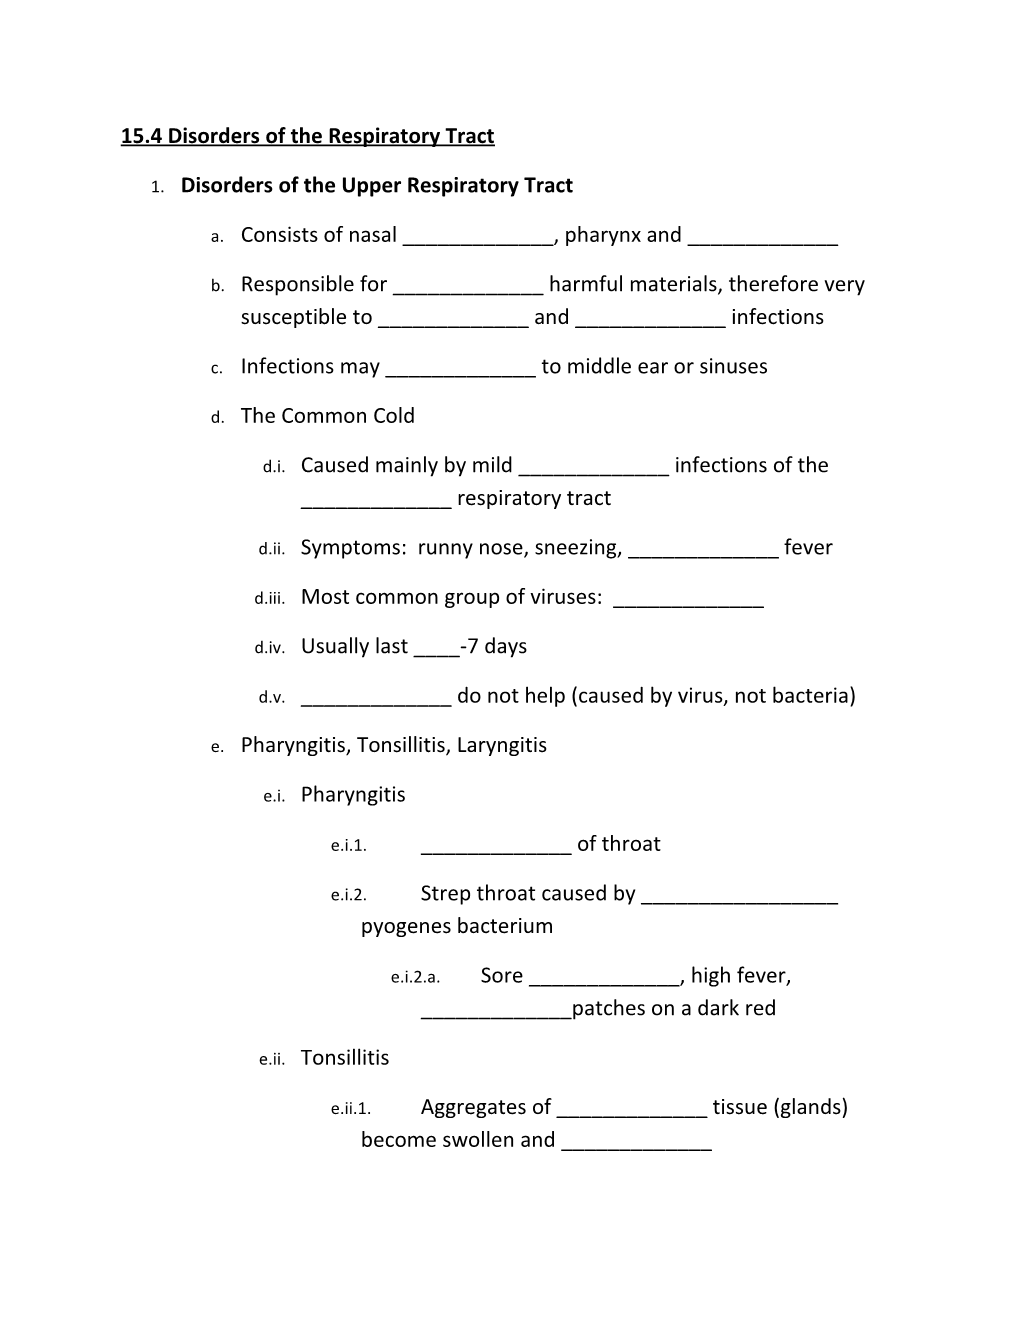 15.4 Disorders of the Respiratory Tract